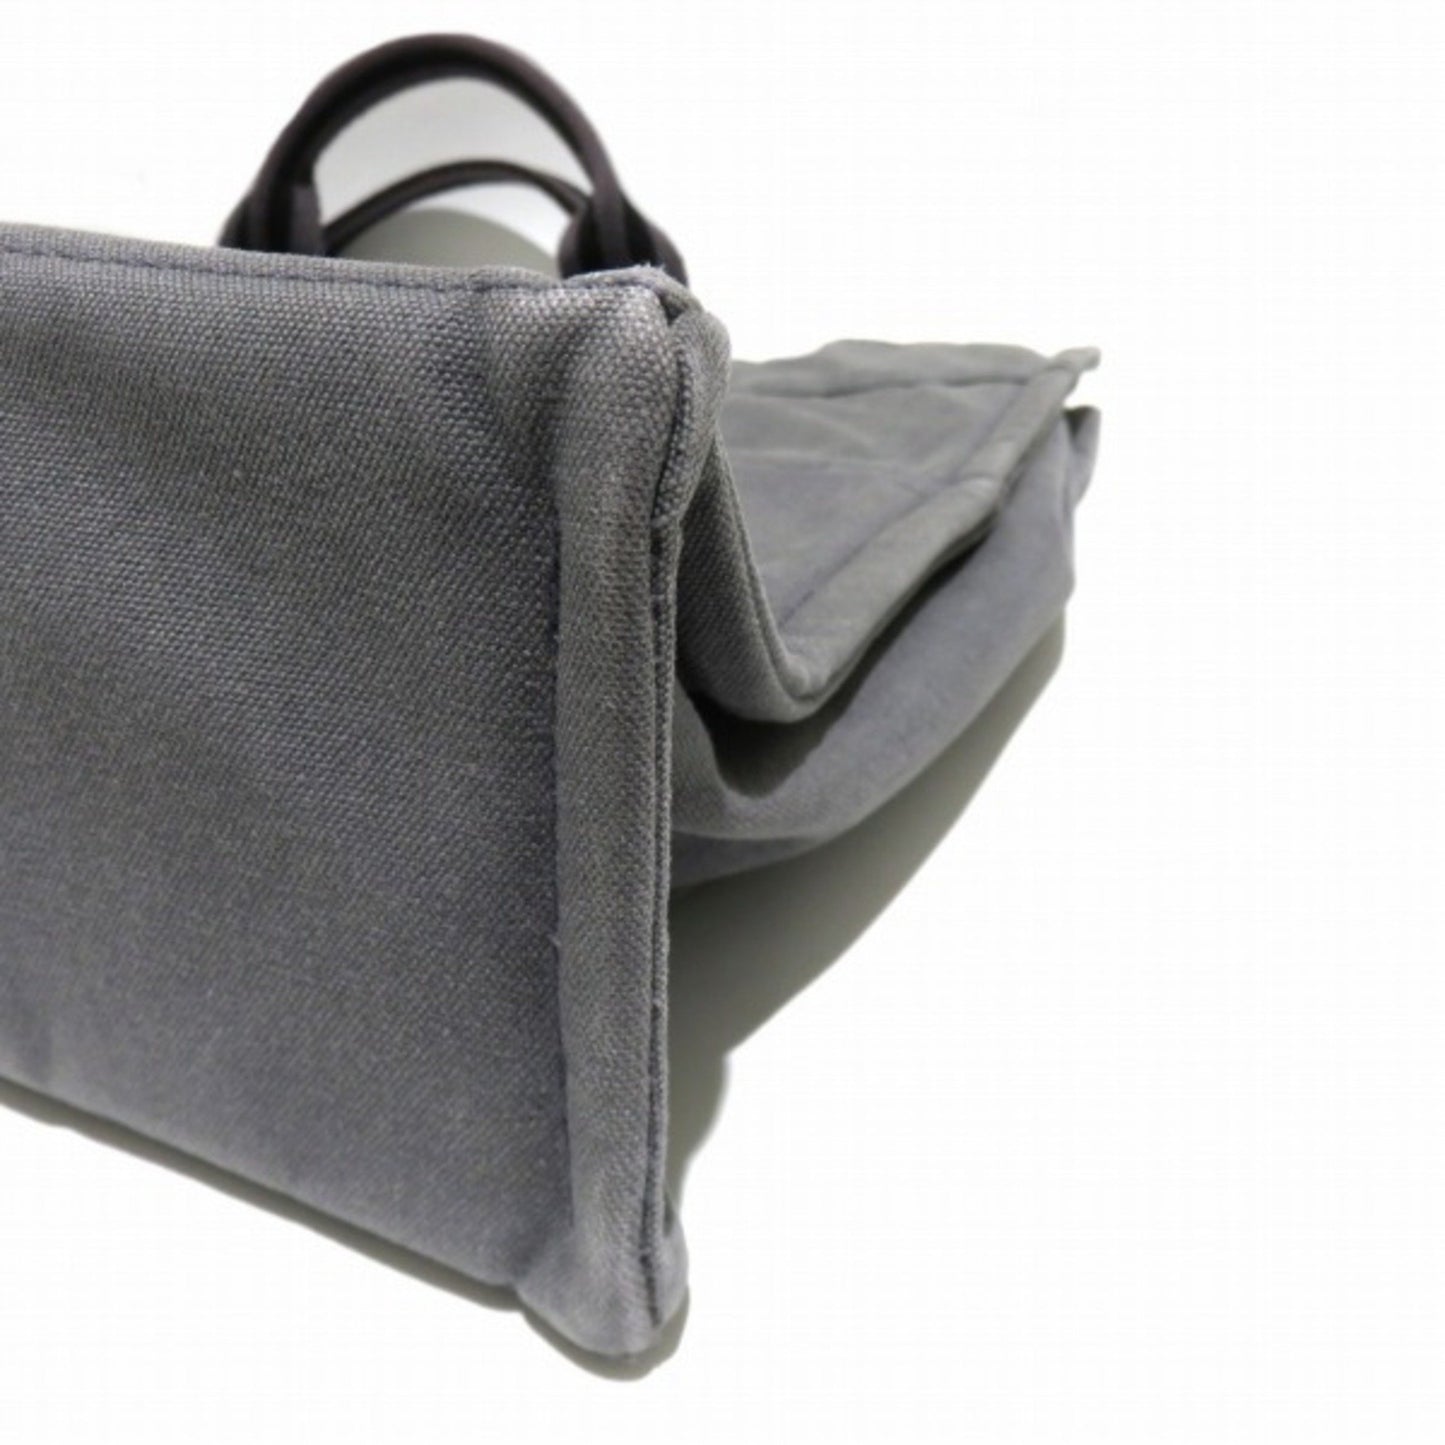 Hermes Unisex Canvas Handbag with Timeless Design and High-Quality Material in Grey